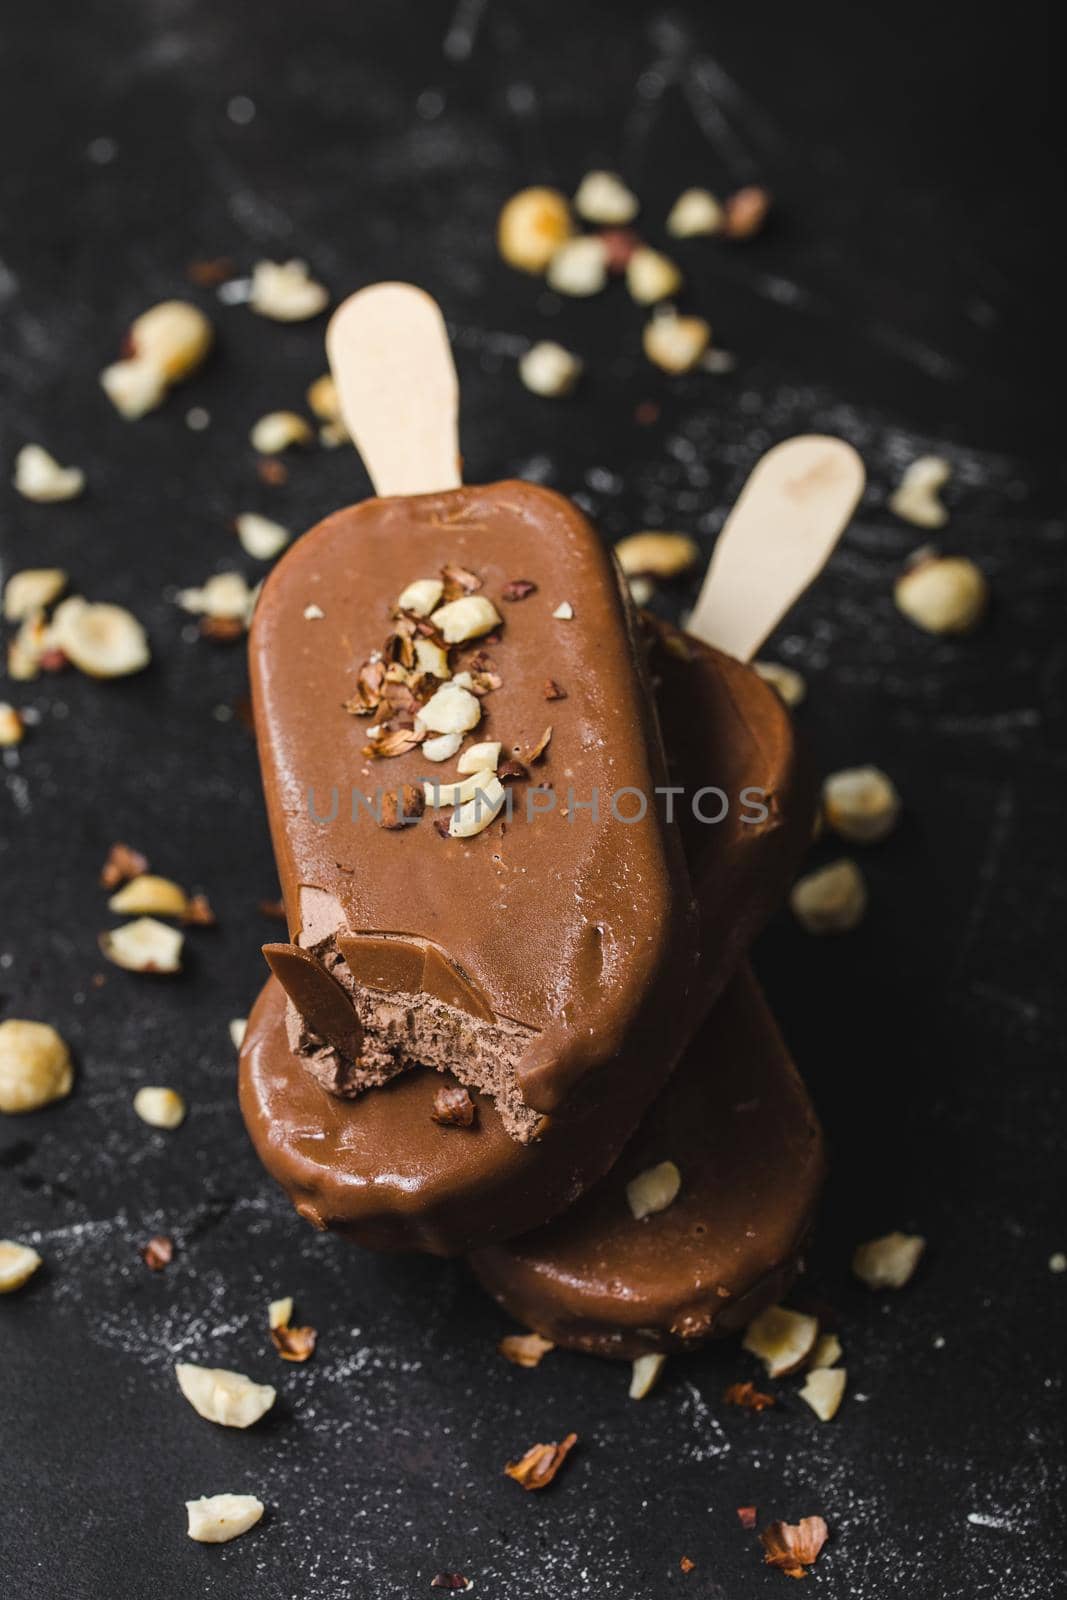 Milk chocolate popsicles with hazelnuts. Close-up. Ice cream popsicles covered with chocolate, sticks, black stone background. Selective focus. Chocolate ice cream bars, nuts. Dessert. Bitten popsicle